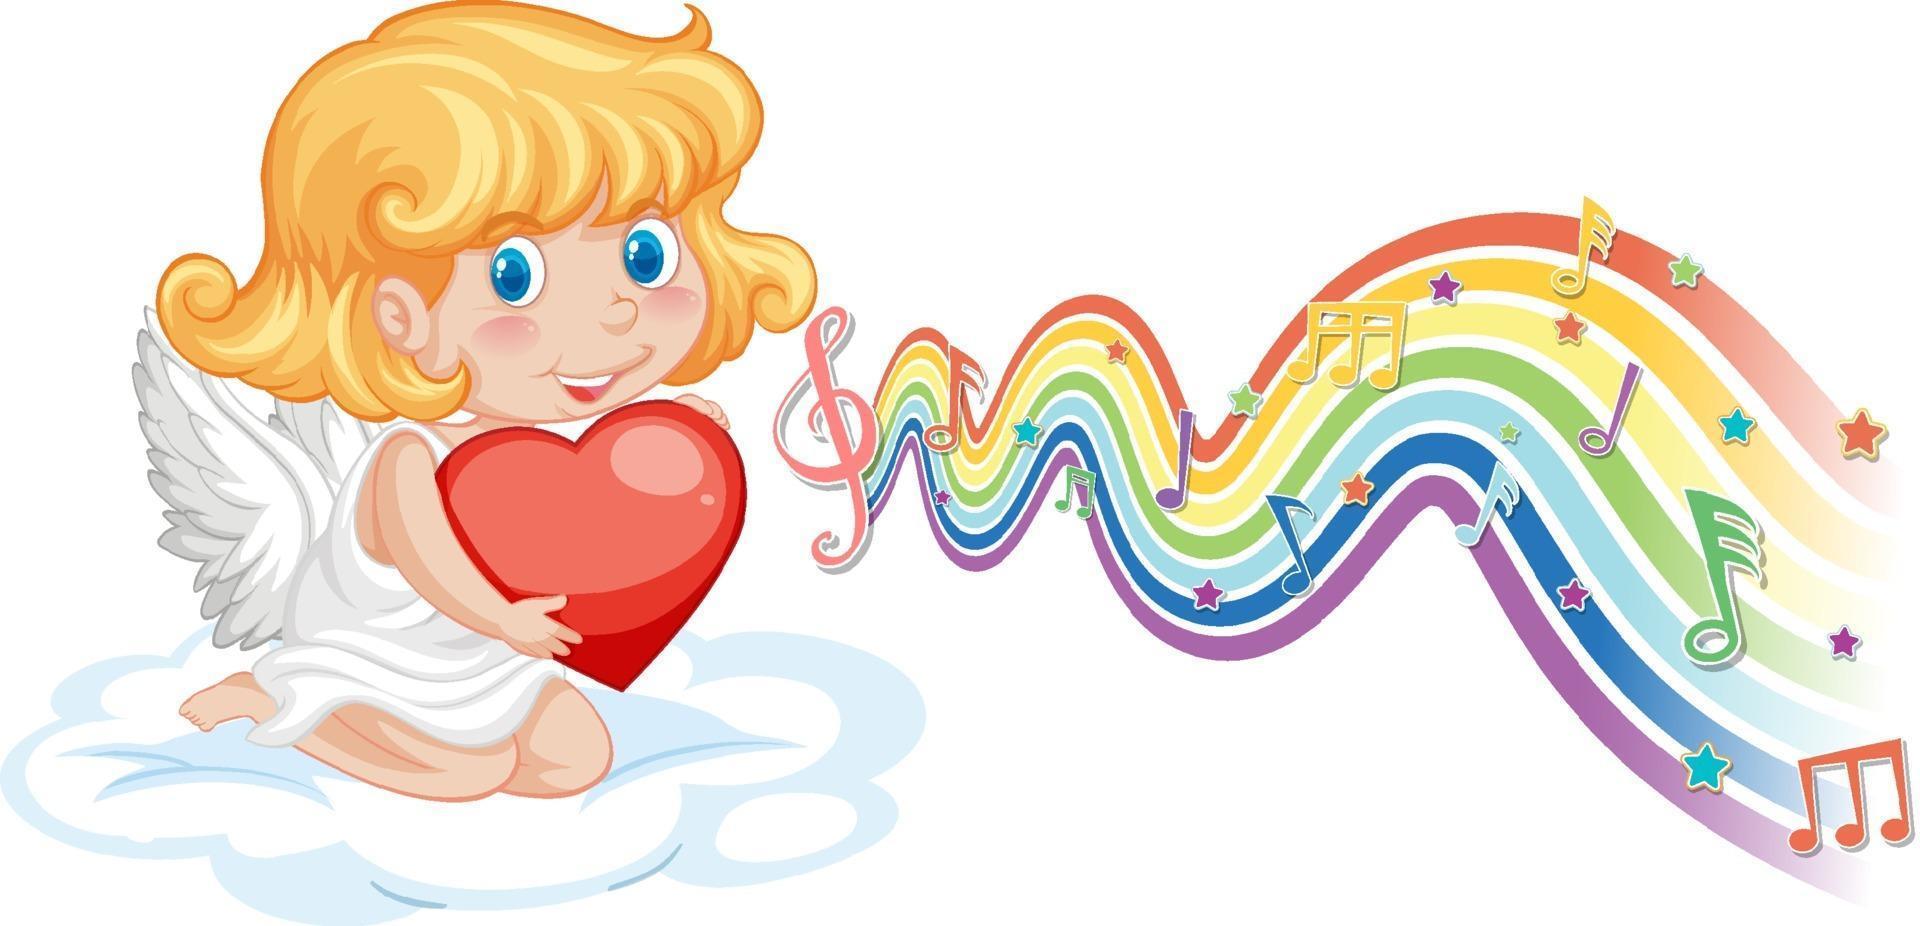 Cupid girl holding heart with melody symbols on rainbow wave vector